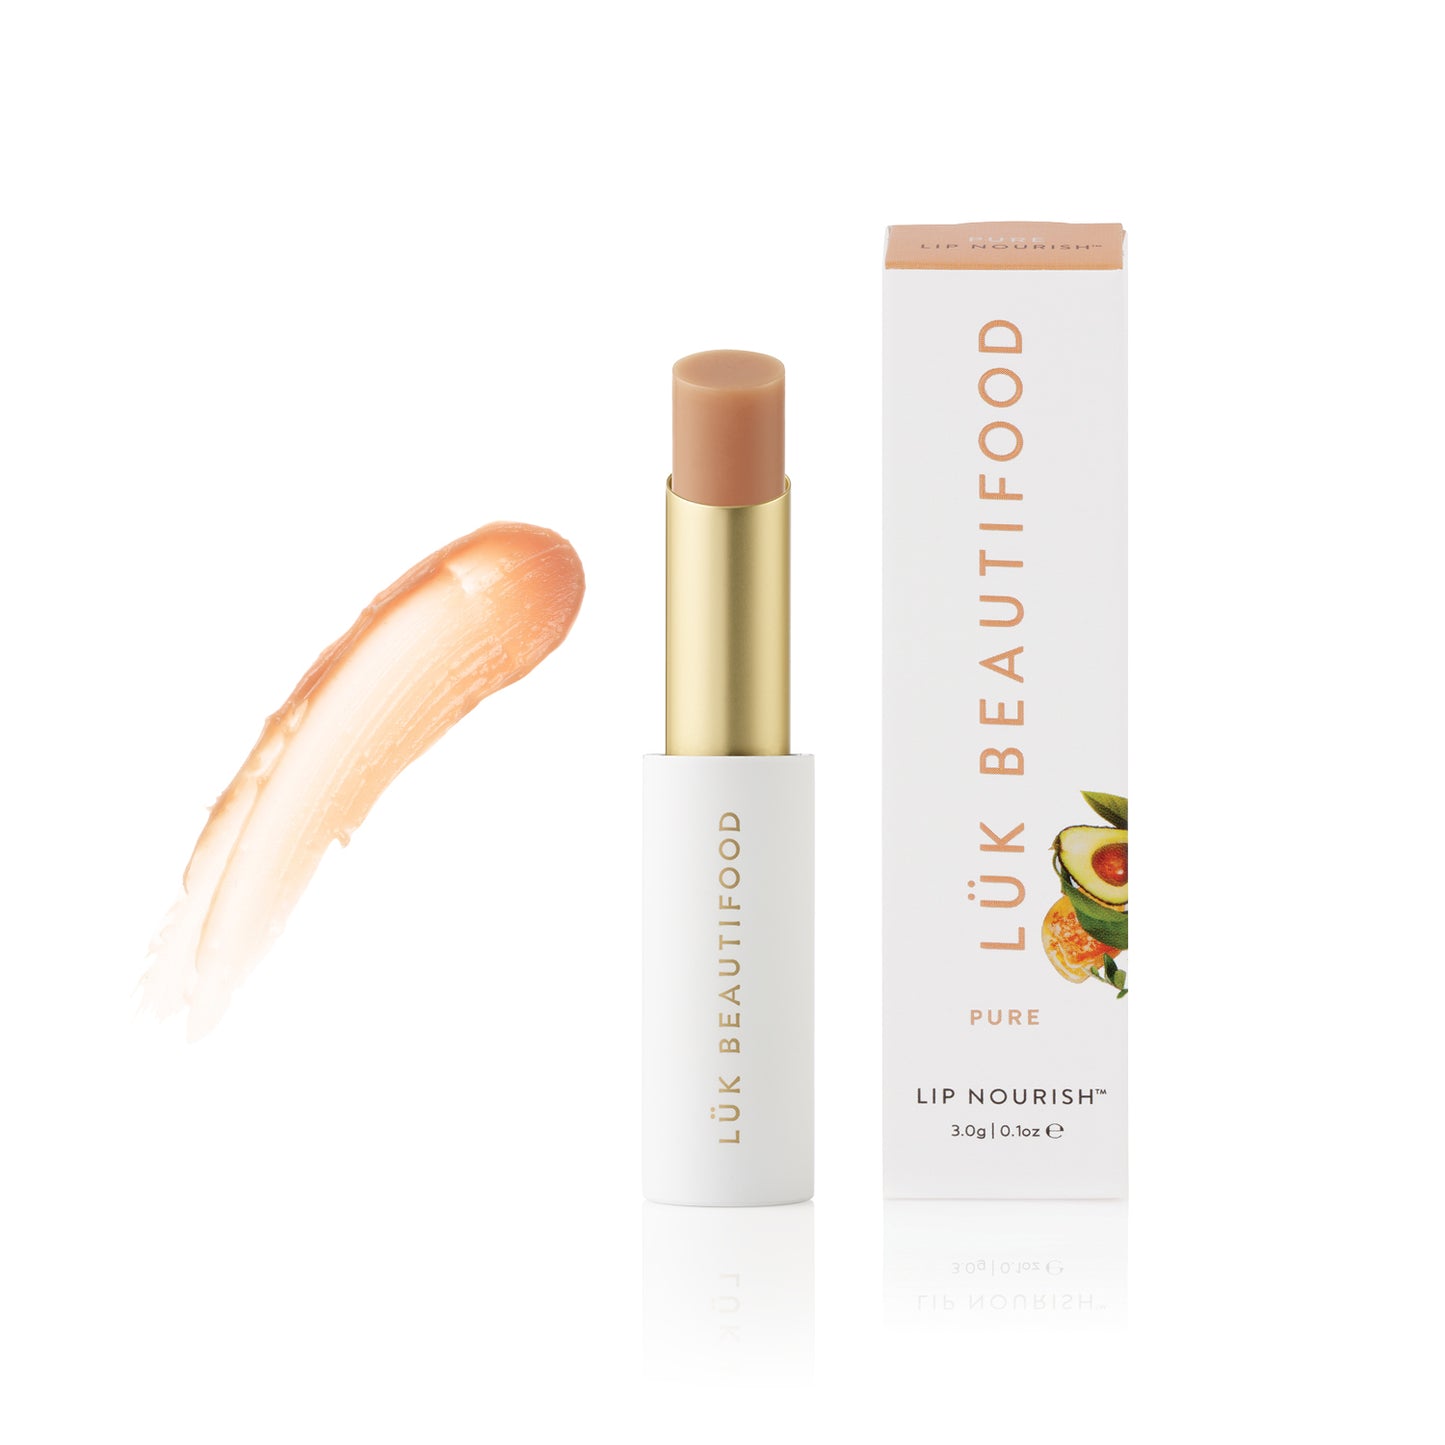 Lip Nourish™ 100% Natural Lipstick - Pure from Luk Beautifood gives you deliciously soft, smooth and lightly coloured lips for all day wear and care. A clear and colour-free nourishment stick for 24/7 moisture, day and night.